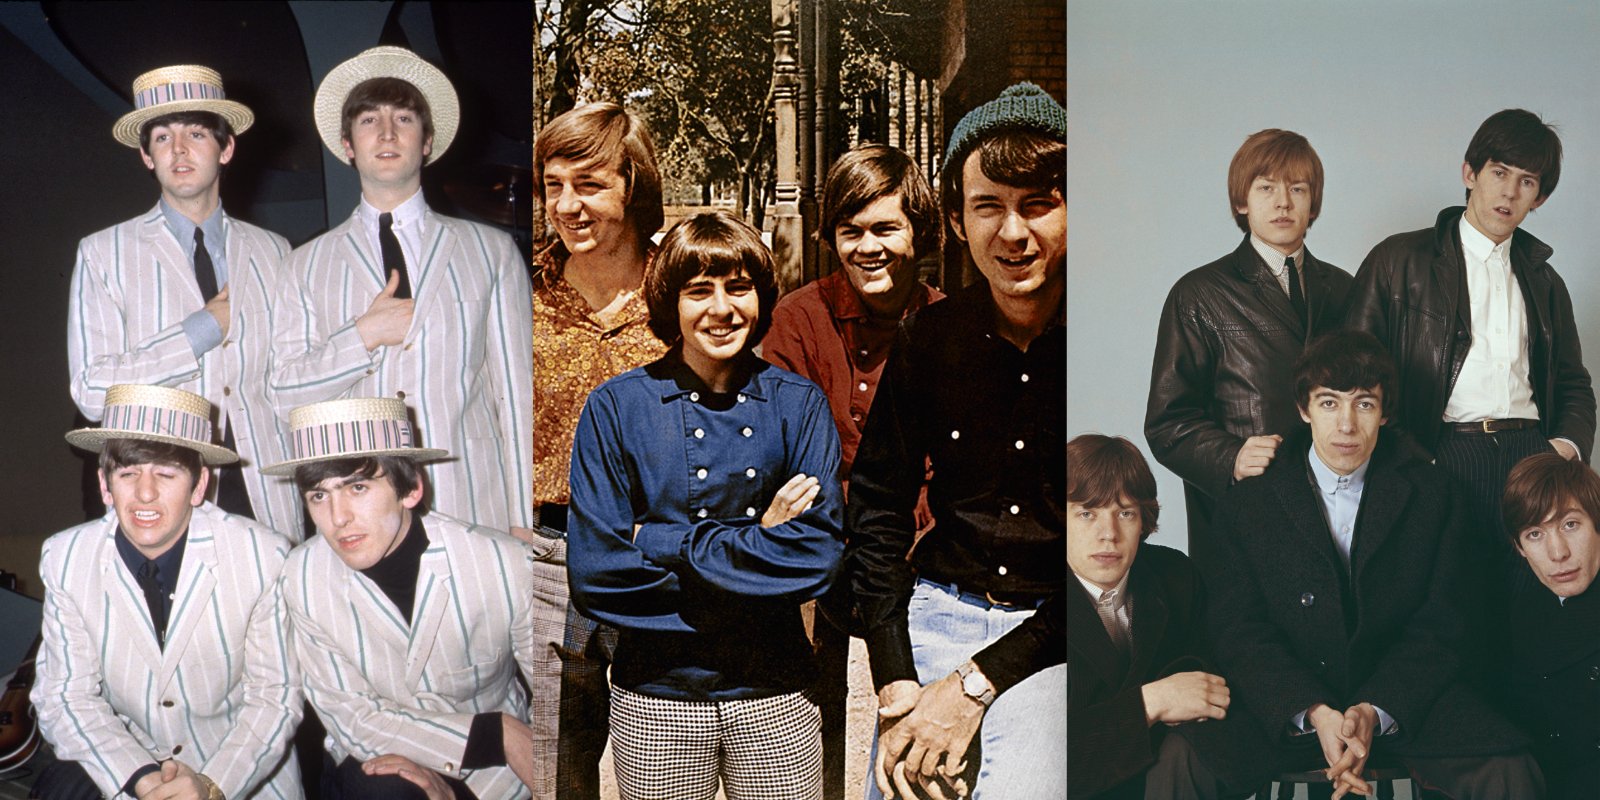 The Beatles, The Monkees and The Rolling Stones in a composite photograph.